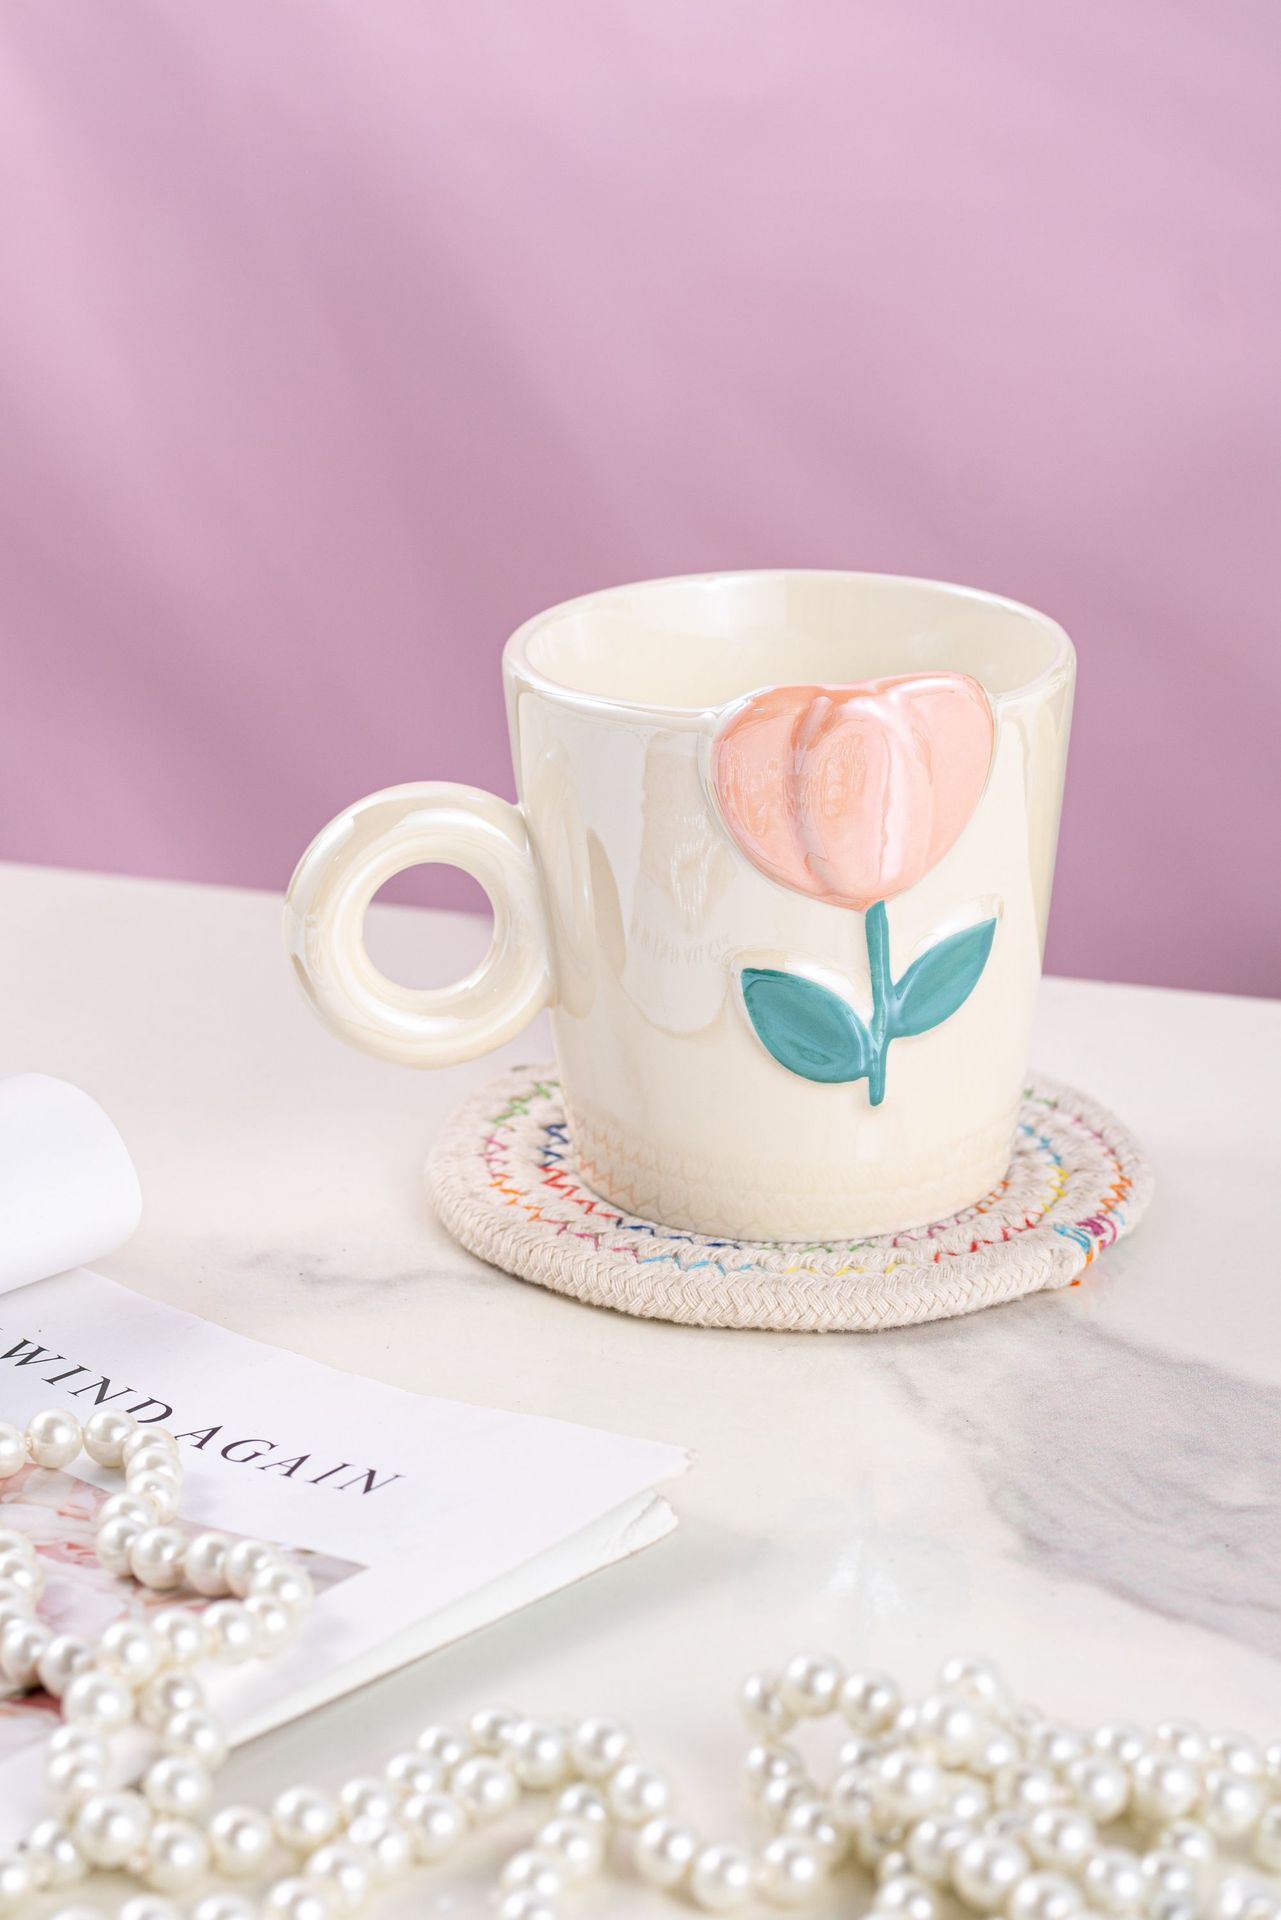 Embossed Tulip Ceramic Water Cup Advanced Young Girls Girlfriends Mug Coffee Cup Girlfriends Gift